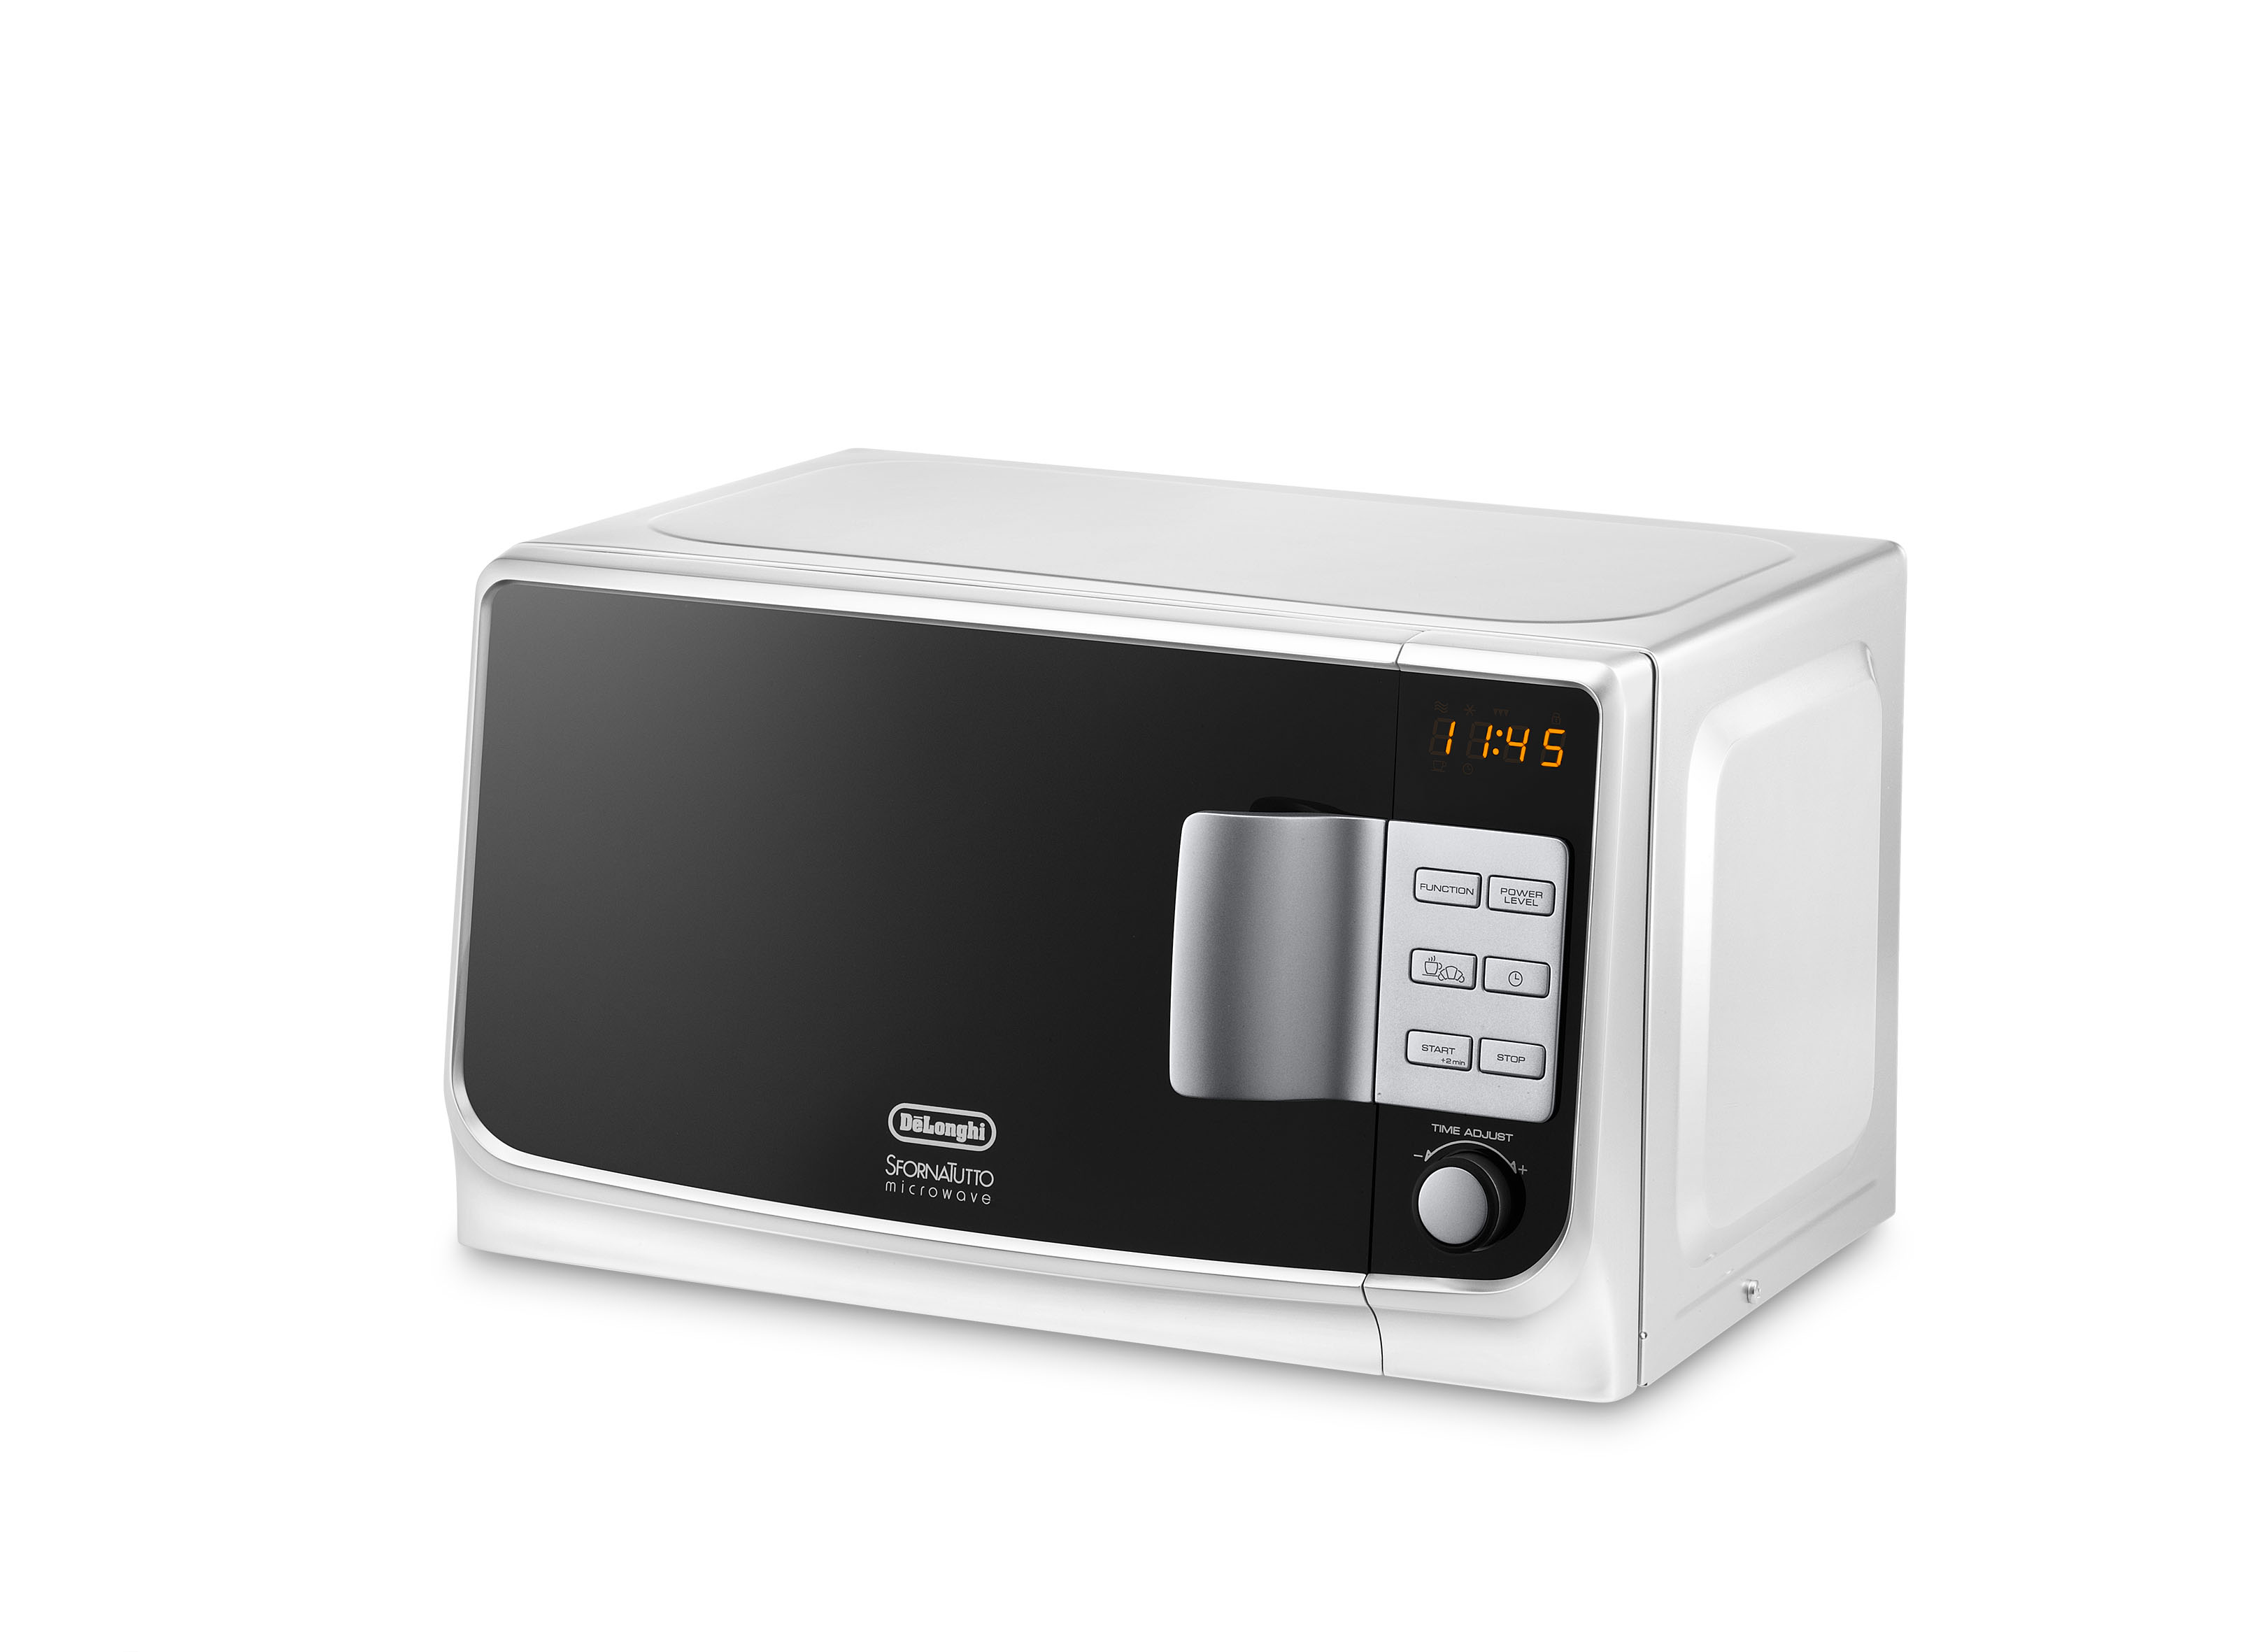 DELONGHI MW 20 G, (Grillfunktion) Mikrowelle